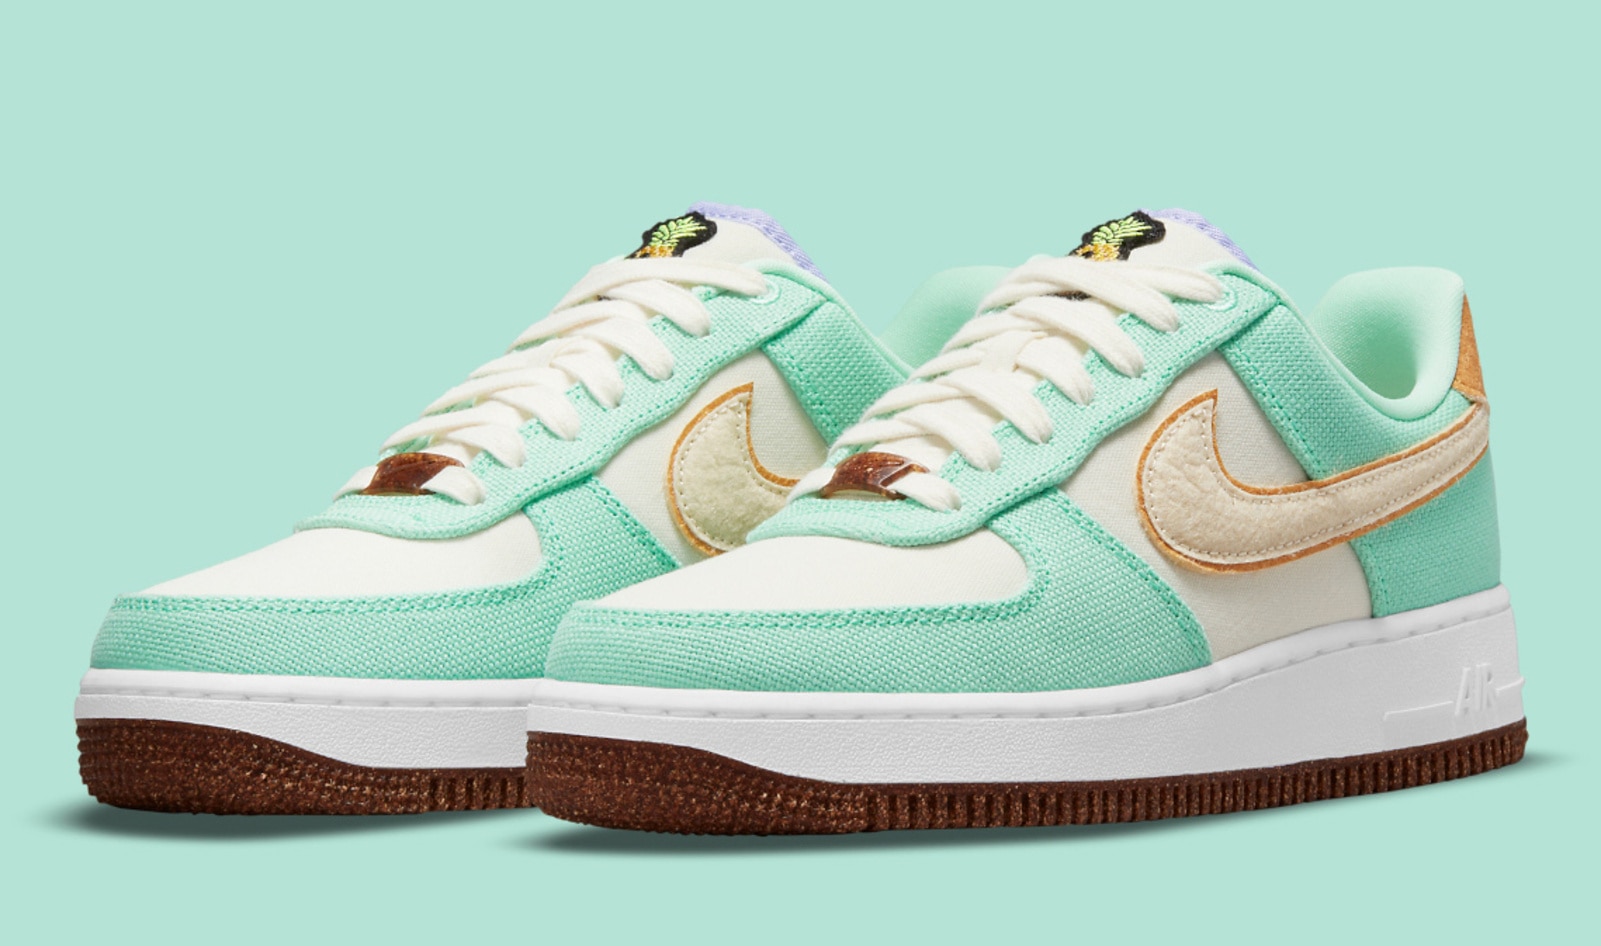 Nike's Iconic Air Force Ones Get a Vegan Pineapple Leather Makeover |  VegNews